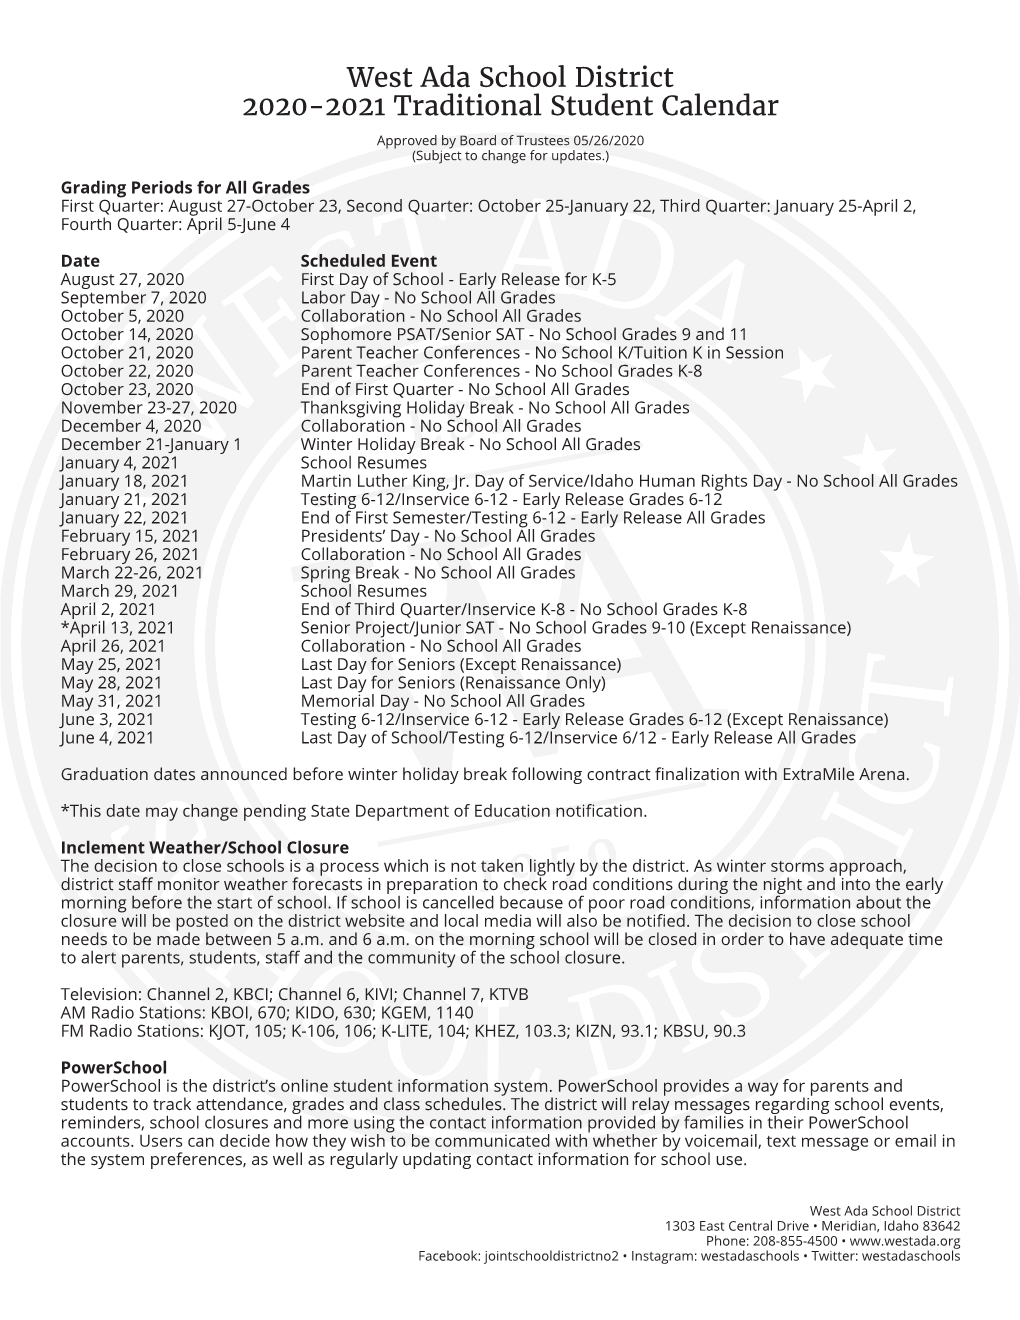 West Ada School District 2020-2021 Traditional Student Calendar Approved by Board of Trustees 05/26/2020 (Subject to Change for Updates.)